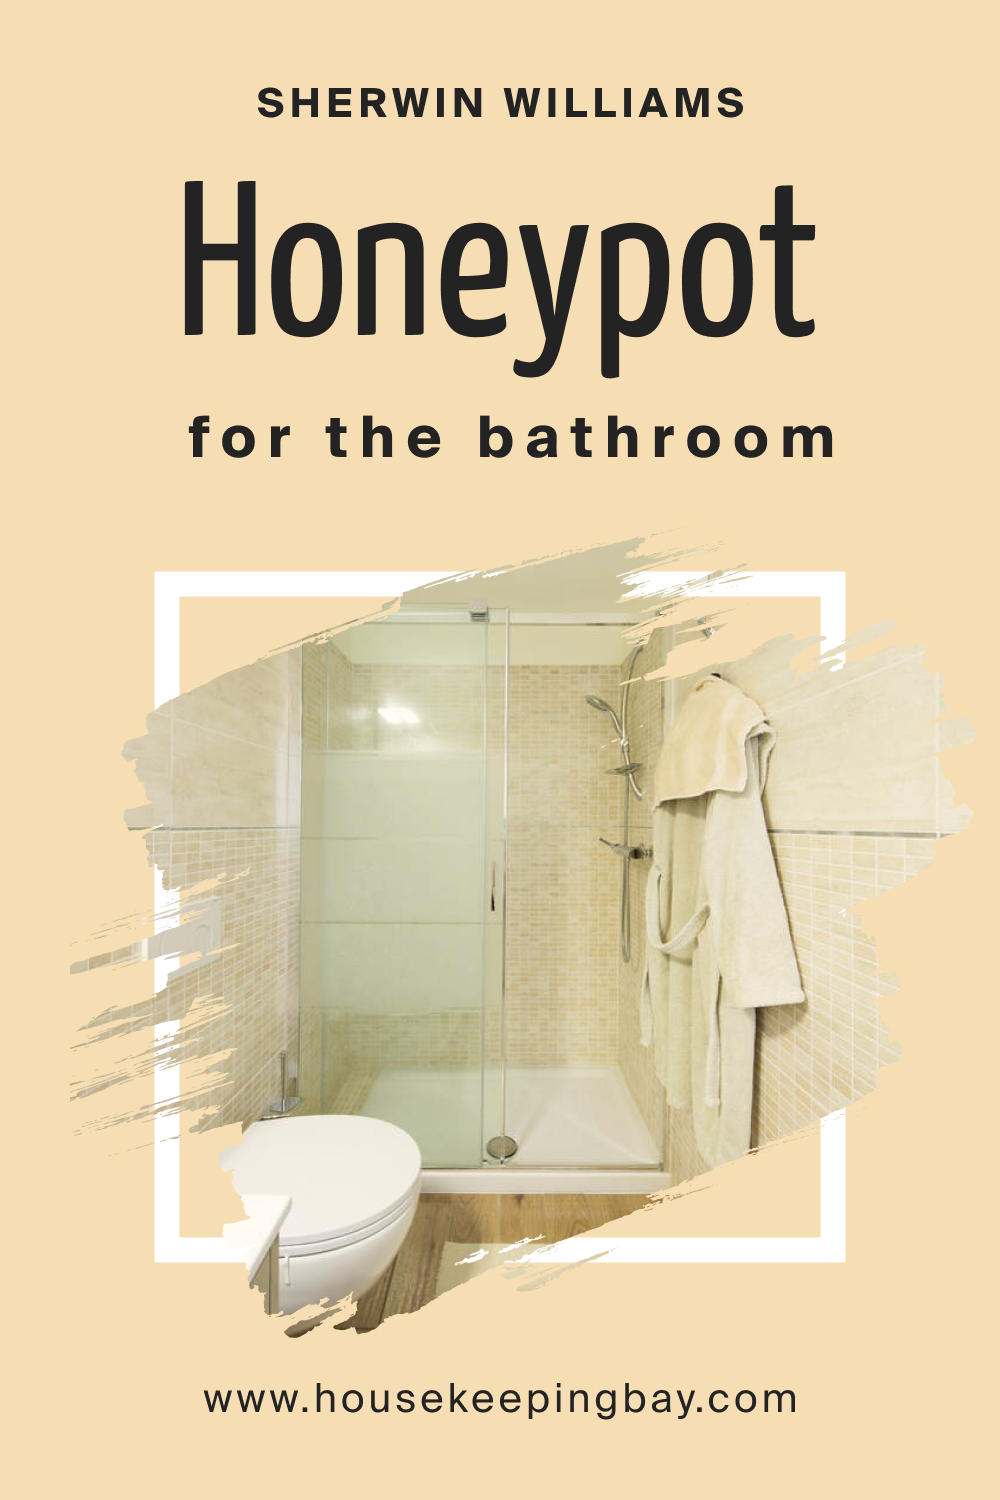 Sherwin Williams. SW 9663 Honeypot For the Bathroom